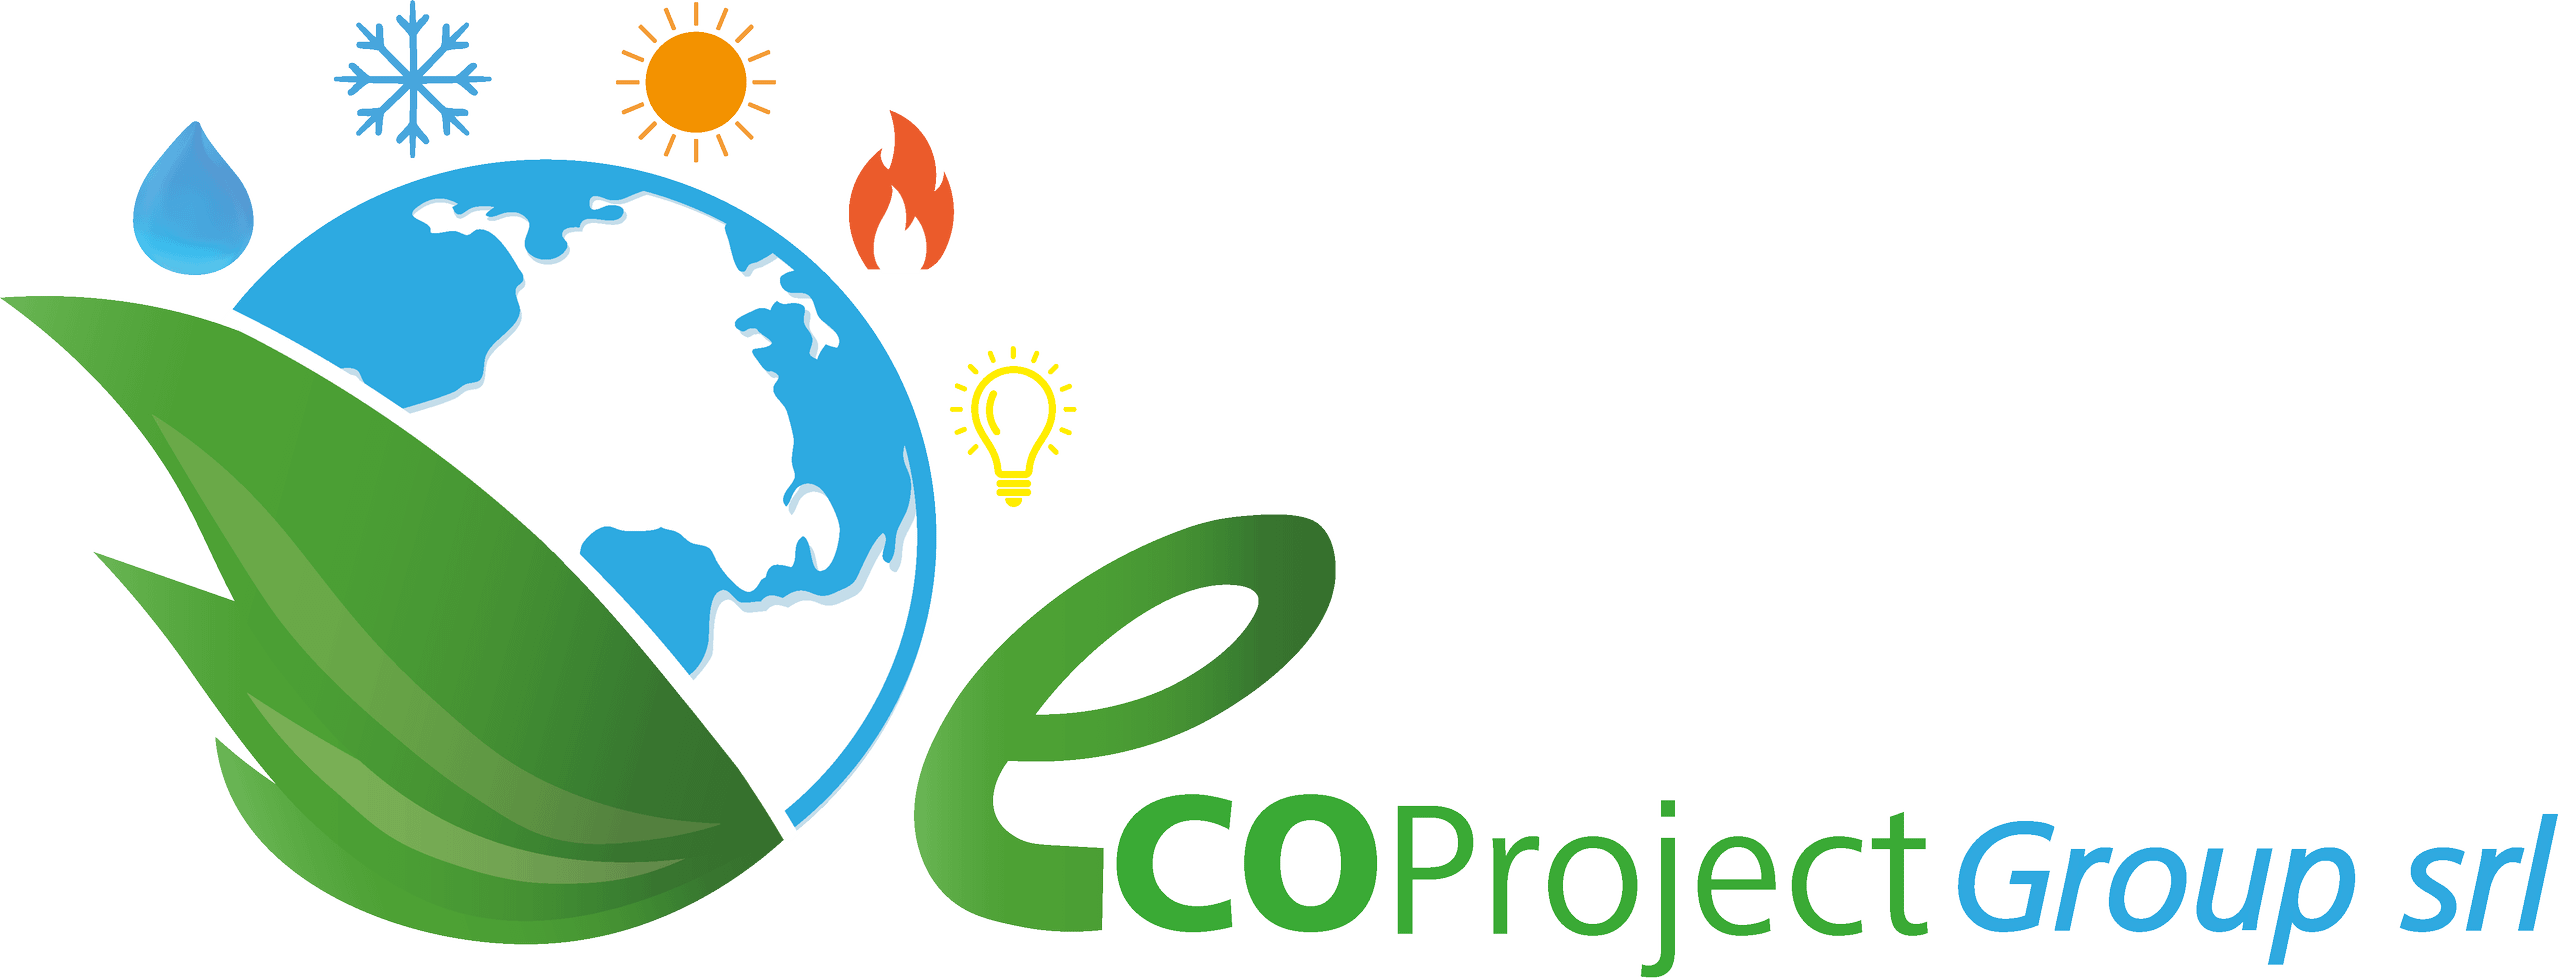 Ecoprojectgroup SHOP ON-LINE